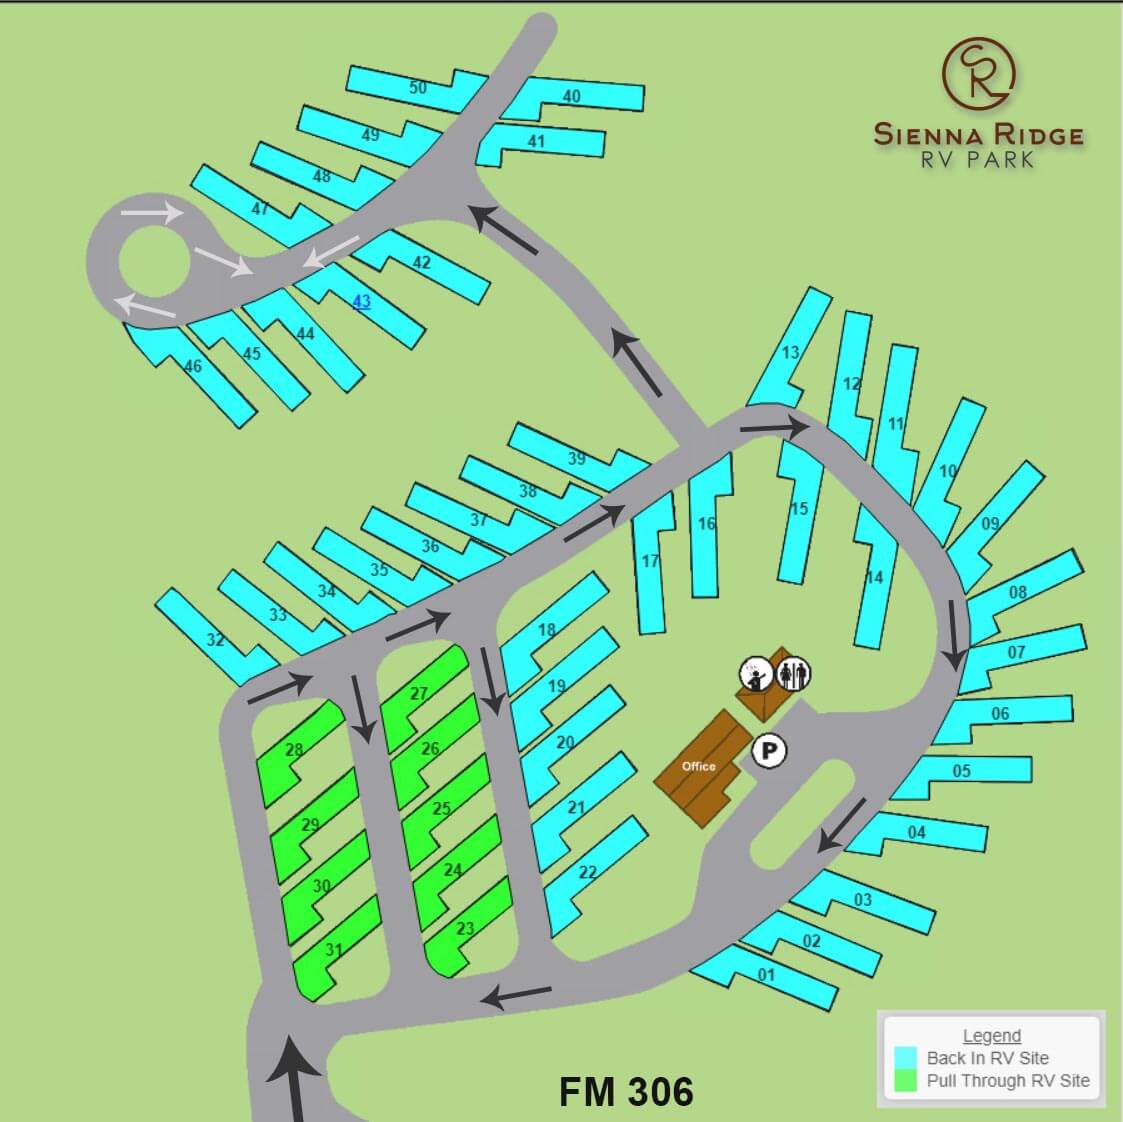 The Campground Map for Sienna Ridge RV Park located off FM 306 at Canyon Lake. Come see our natural settings for your travel plans.